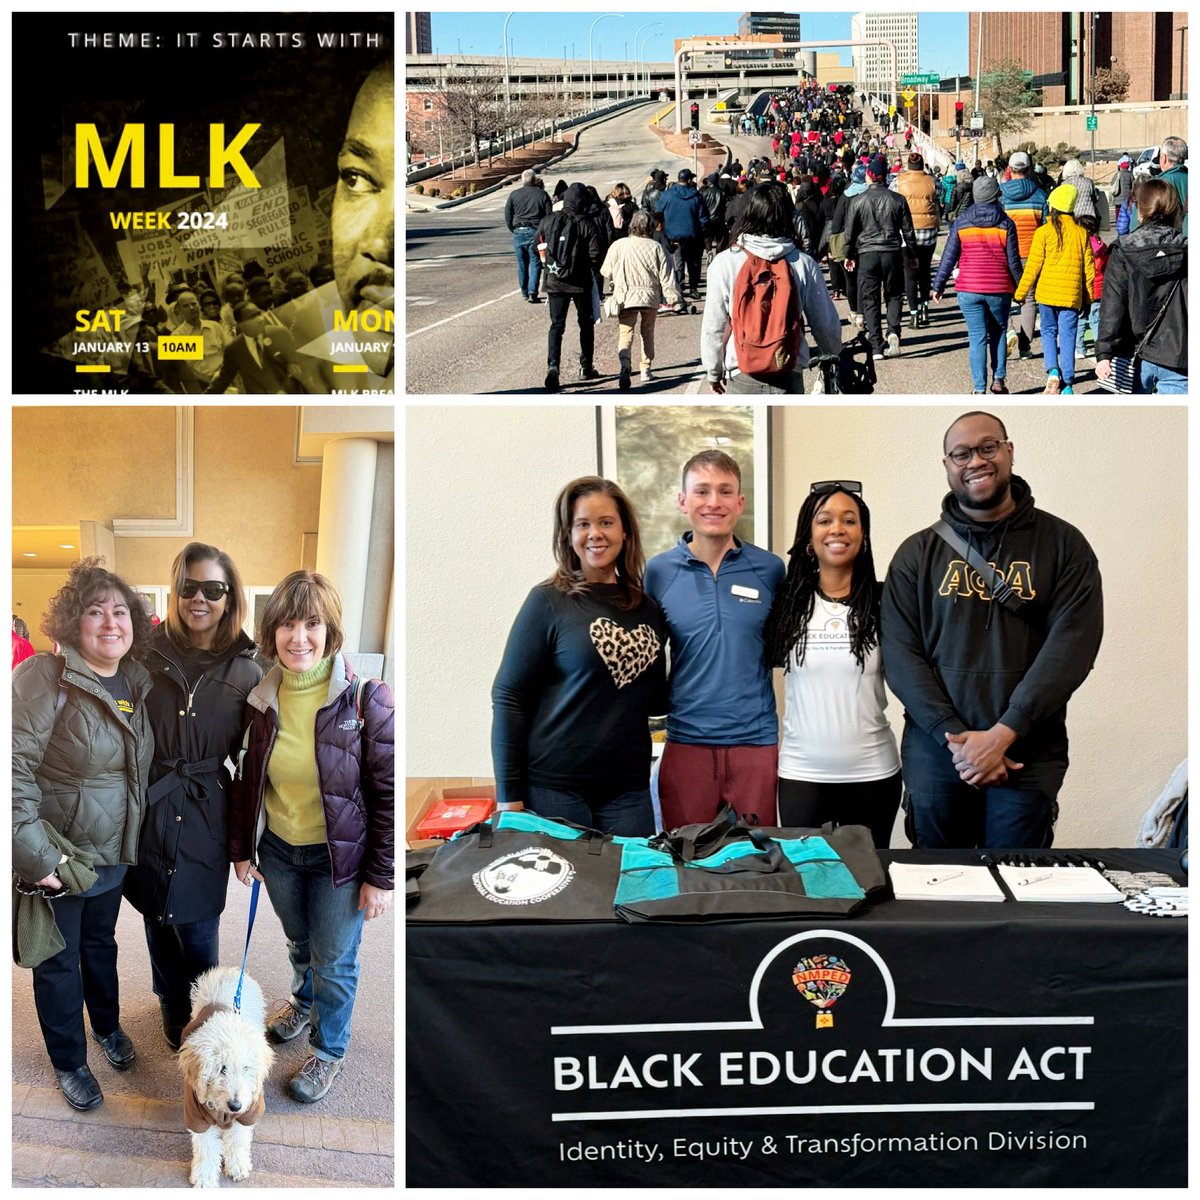 🌟 Started this Martin Luther King Jr. Weekend taking part in a commemorative march and reflecting on how his legacy champions #education, #character, and #publicservice. Dr. King’s words are a constant reminder and invitation to think intensively, act compassionately, and work